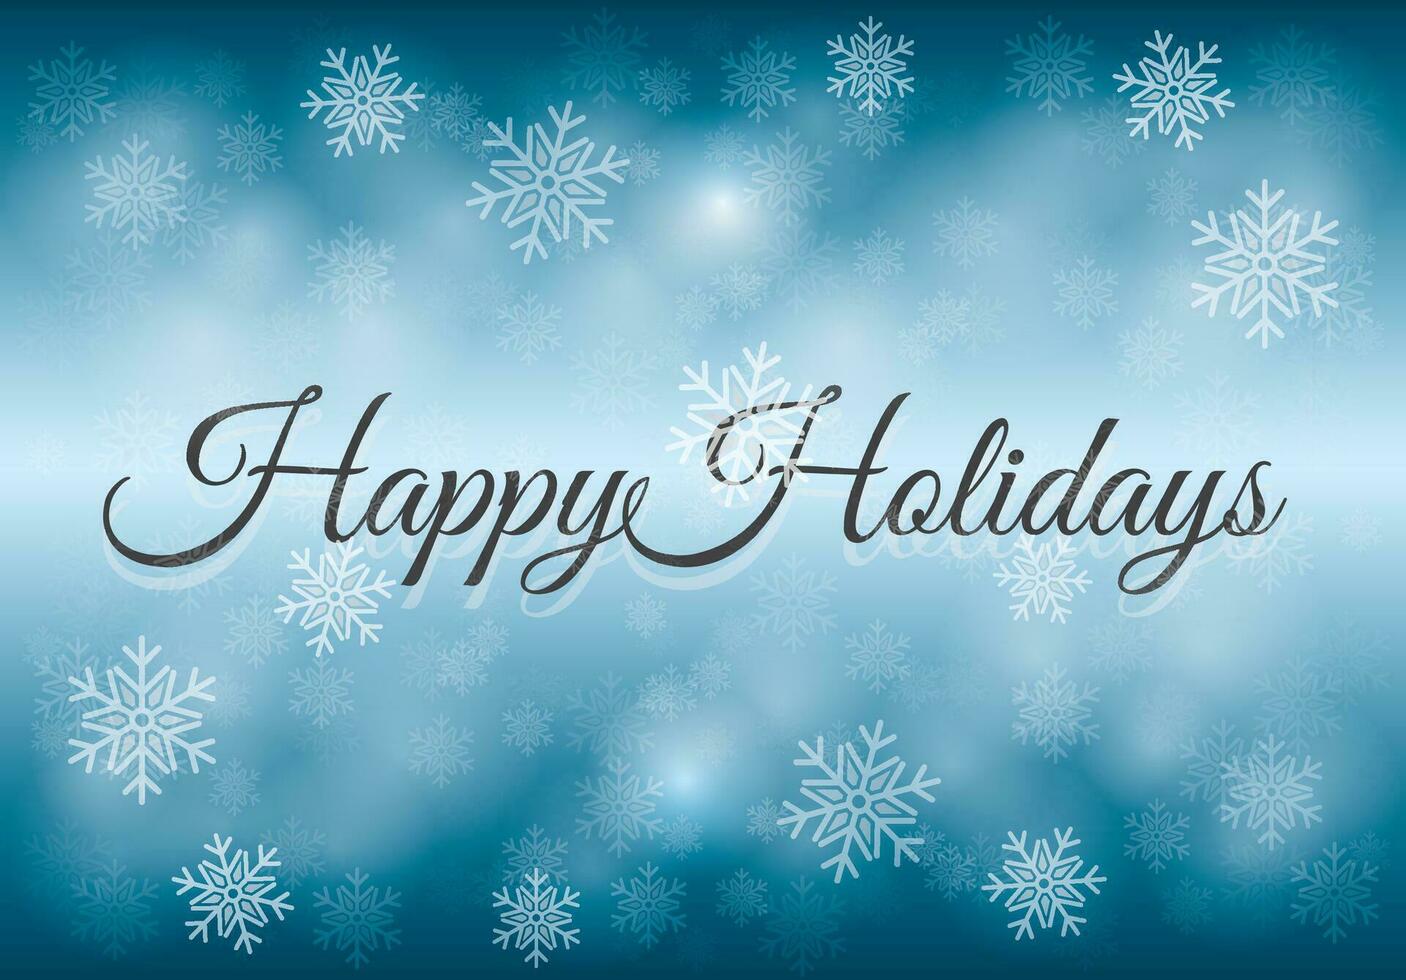 Happy holidays background with snowflakes. Vector illustration.